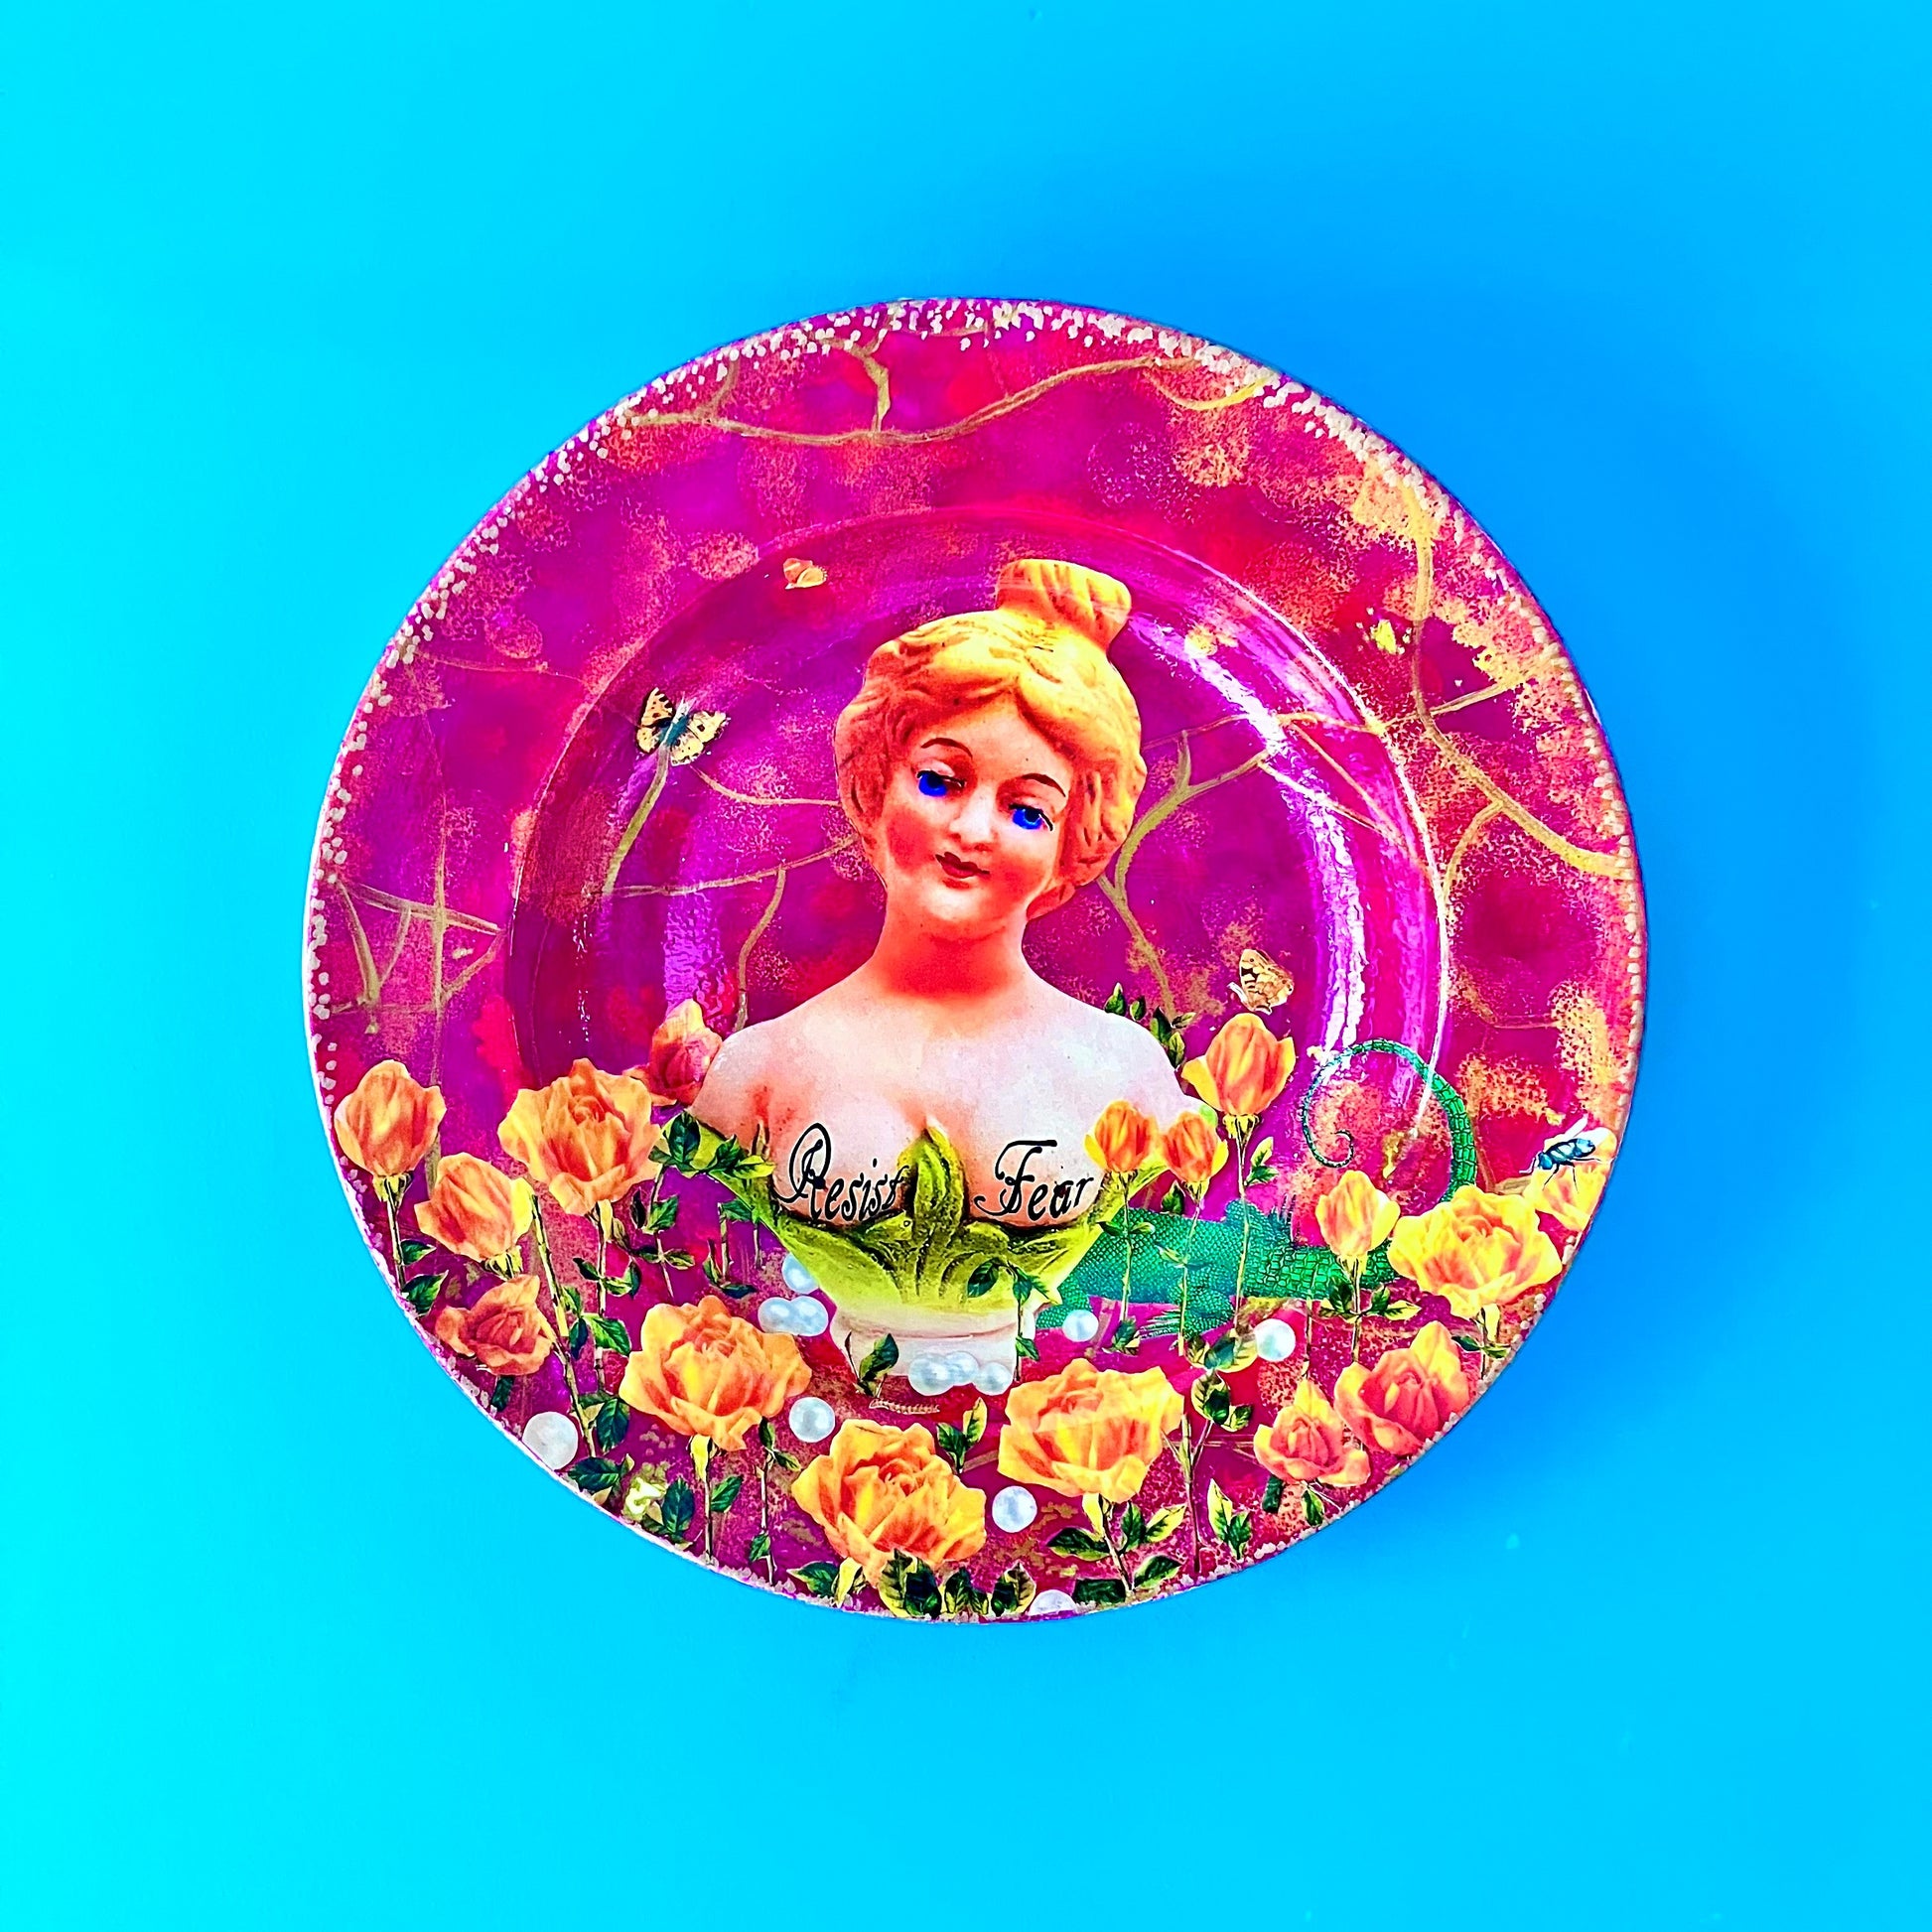 "Resist Fear" Wall Plate by House of Frisson, featuring a female bust statue with "Resist Fear" written across breasts, surrounded by flowers, and pearls, on a purple background. Showing plate on a blue wall.